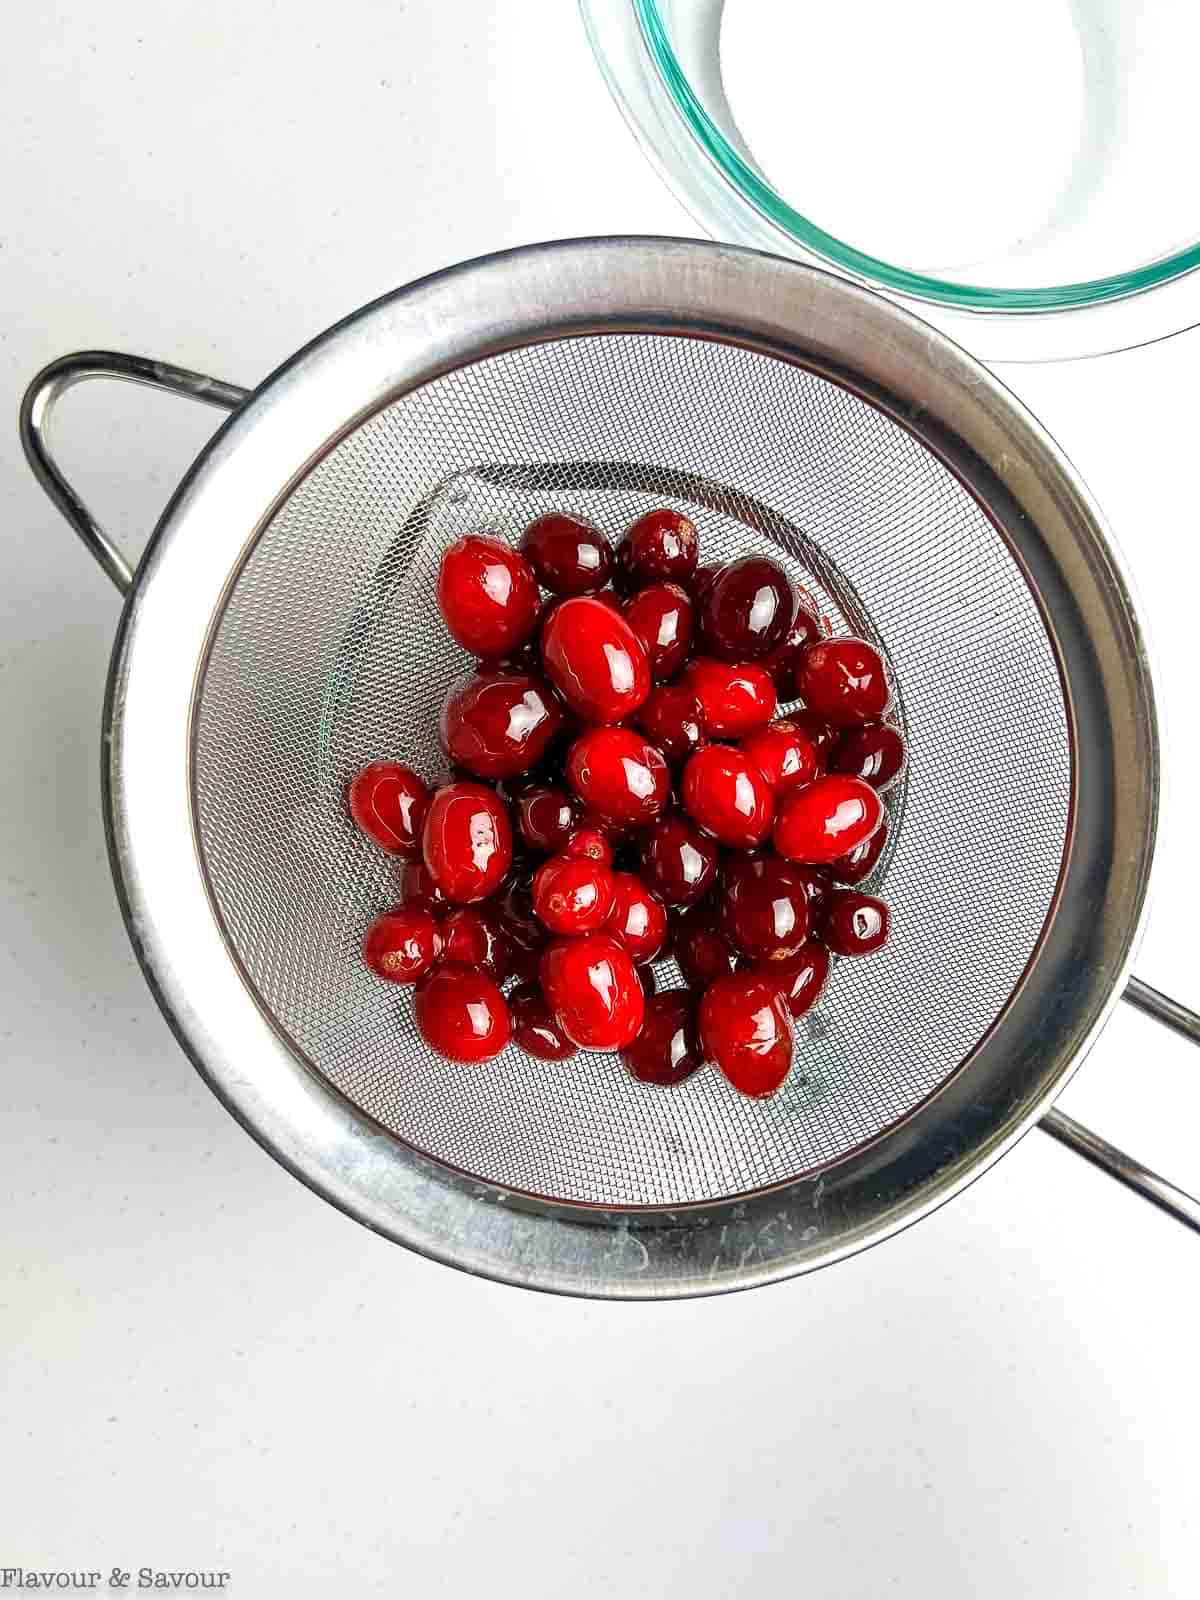 Cranberries in a sieve.